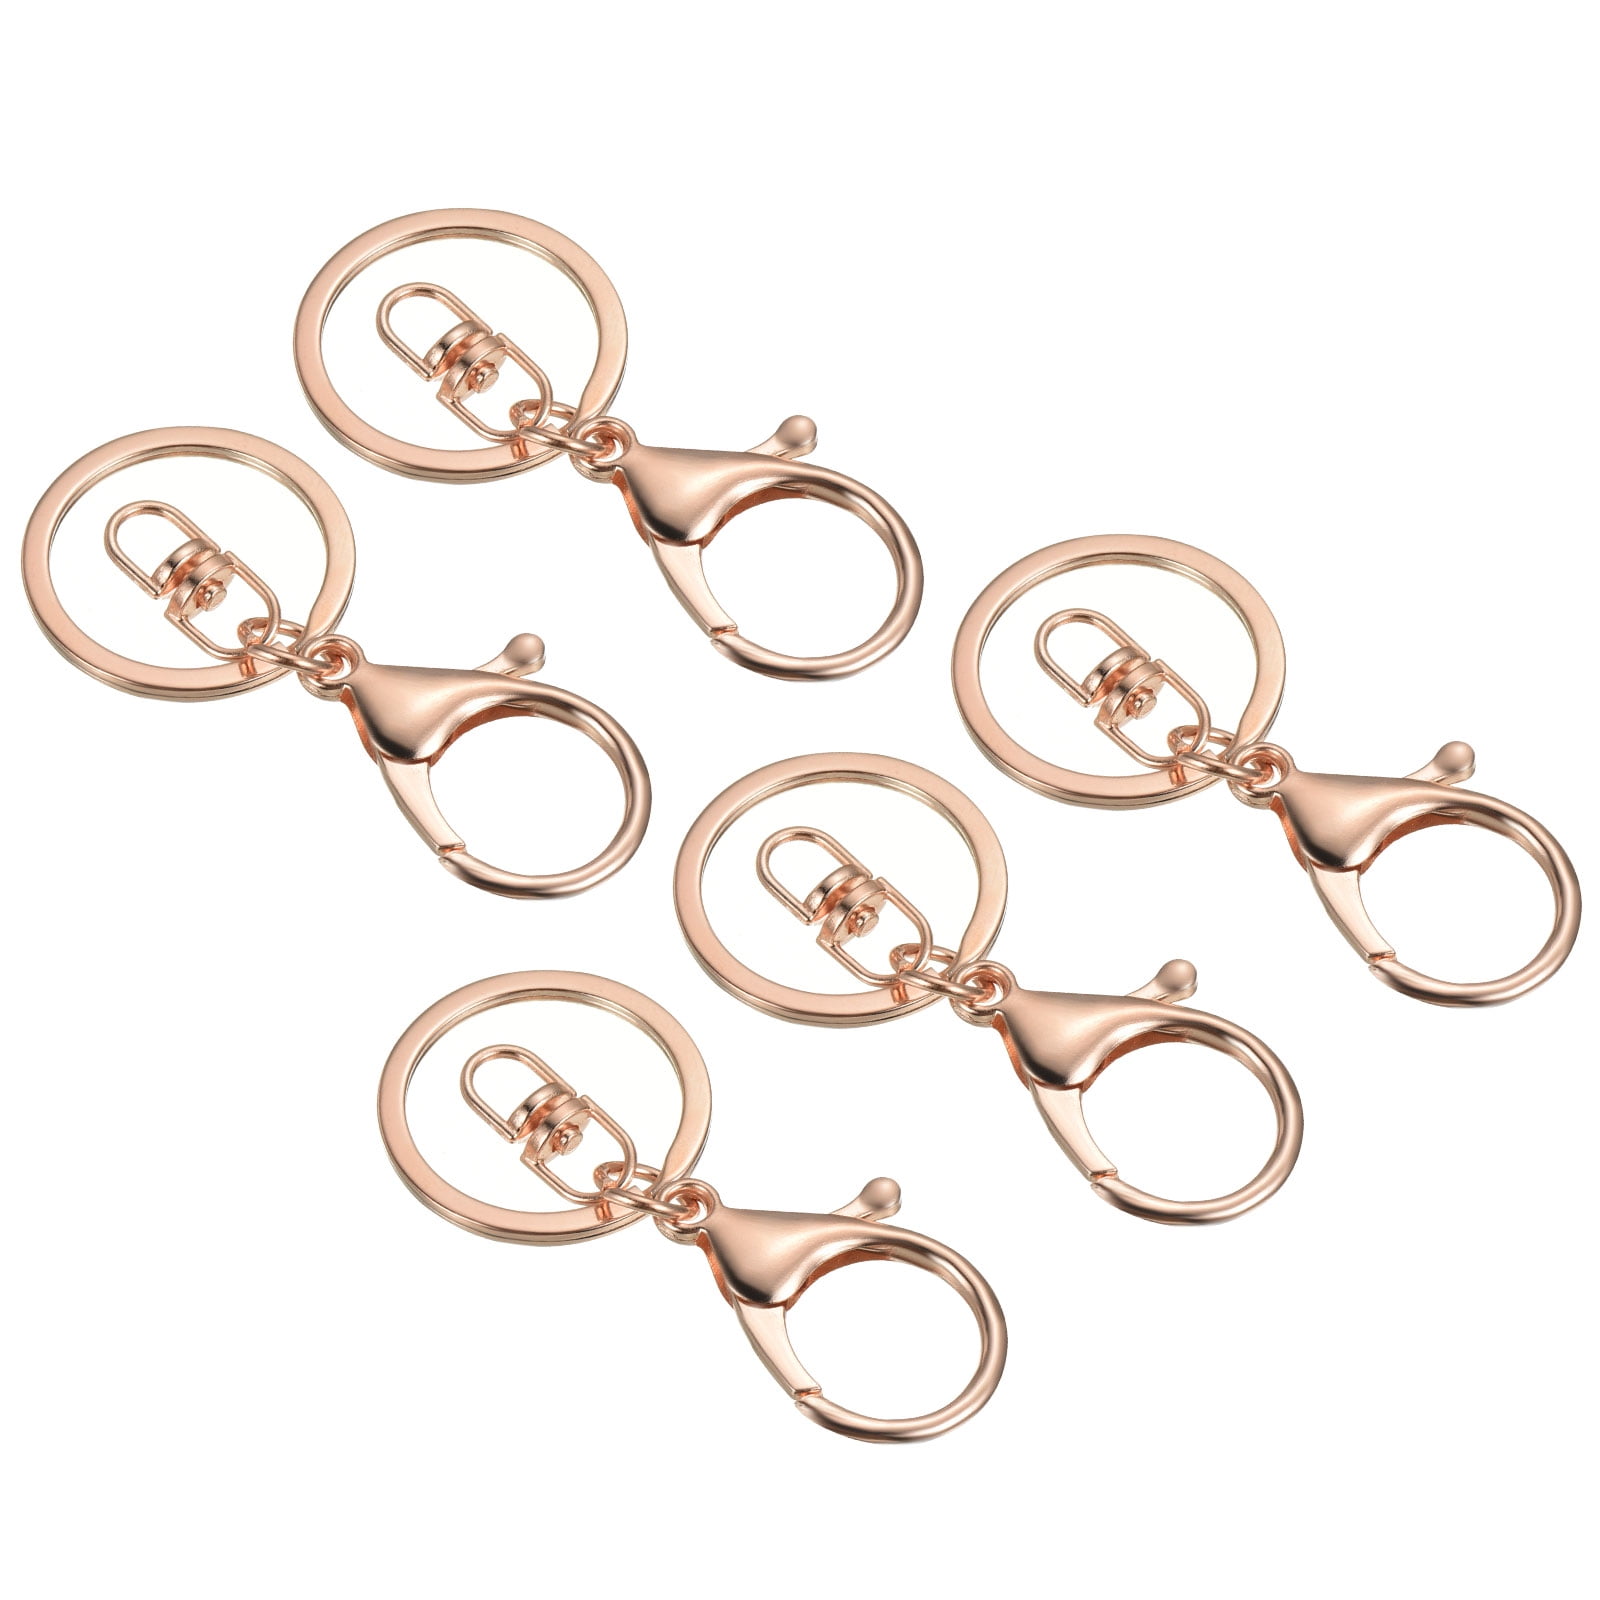 SmartPartsCrafts 10 Large Rose Gold Keychains with Clasp, Lobster Clasp, Swivel Key Chain Clasp for Adding Lanyards, Purses, Add Your Own Charms, fin0642